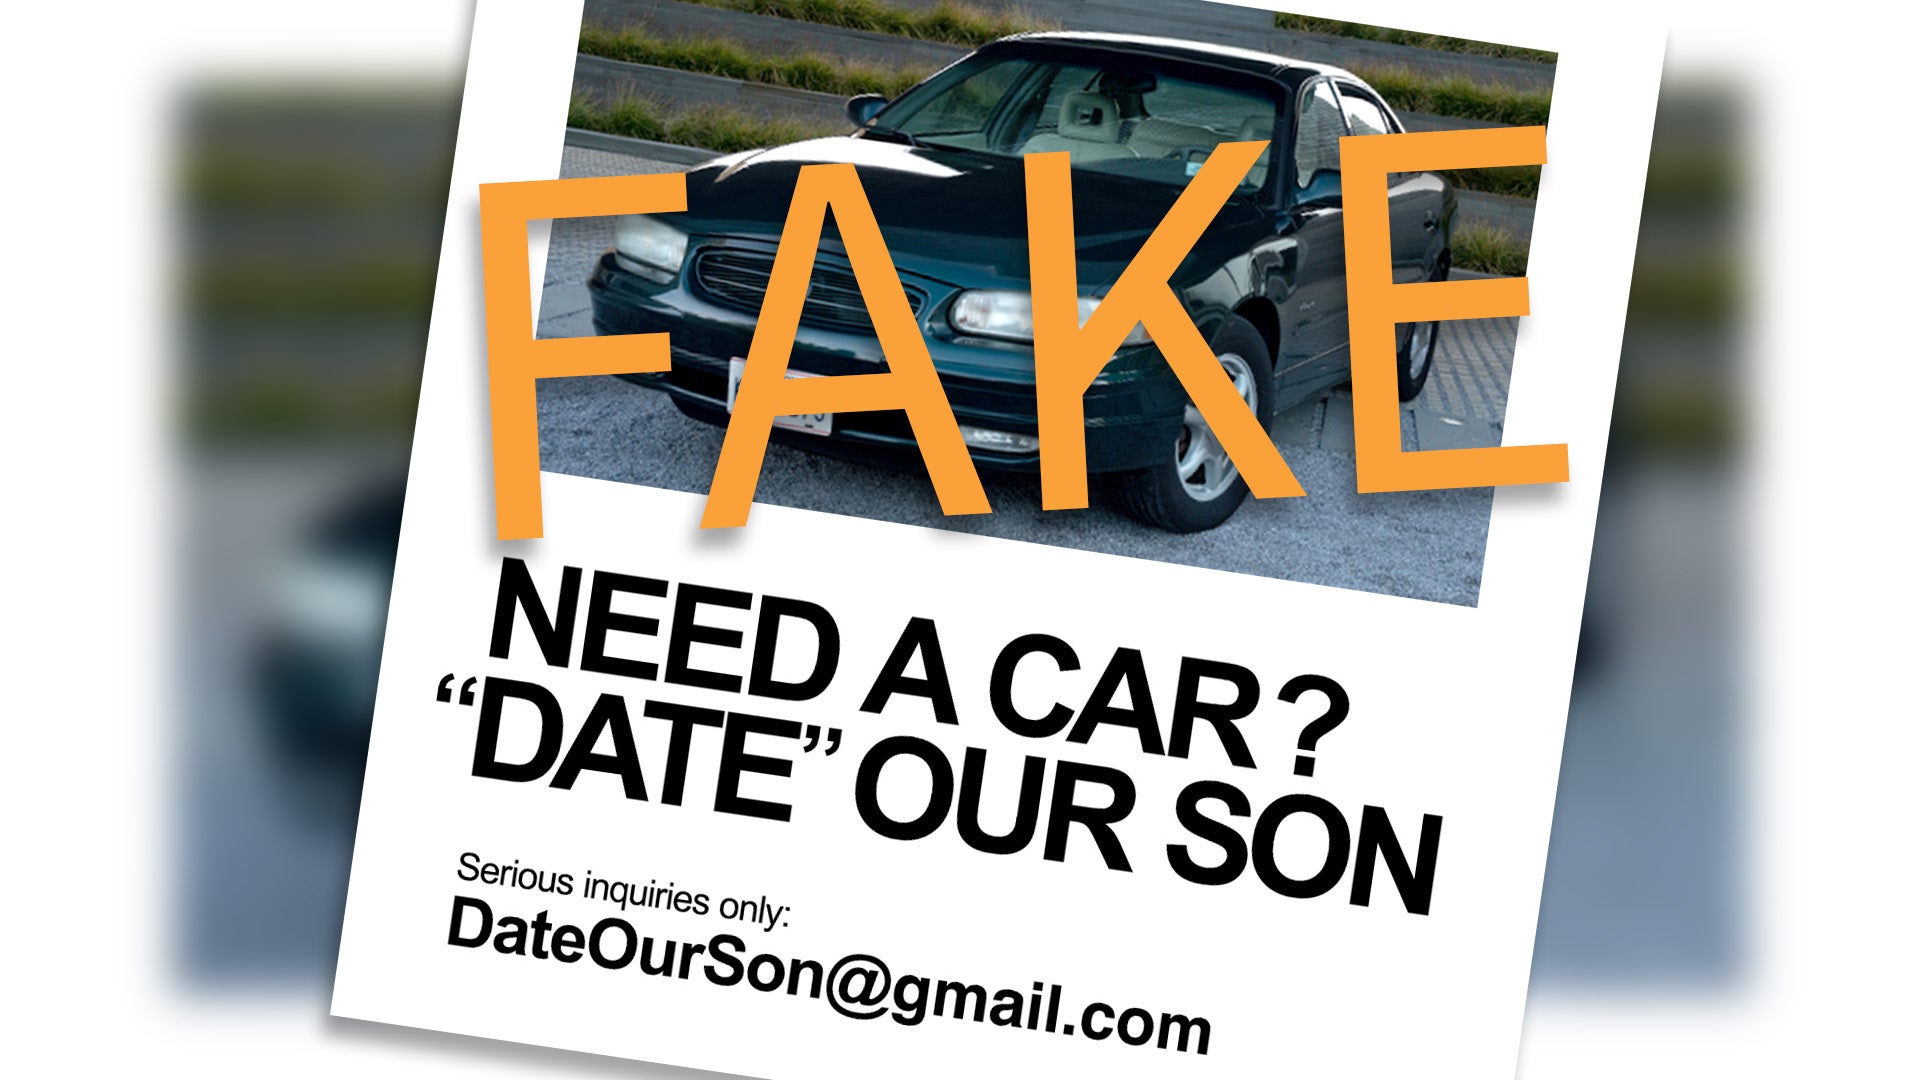 That Bizarre ‘Date Our Son’ Buick Regal Listing Is Really an Ad for a Movie